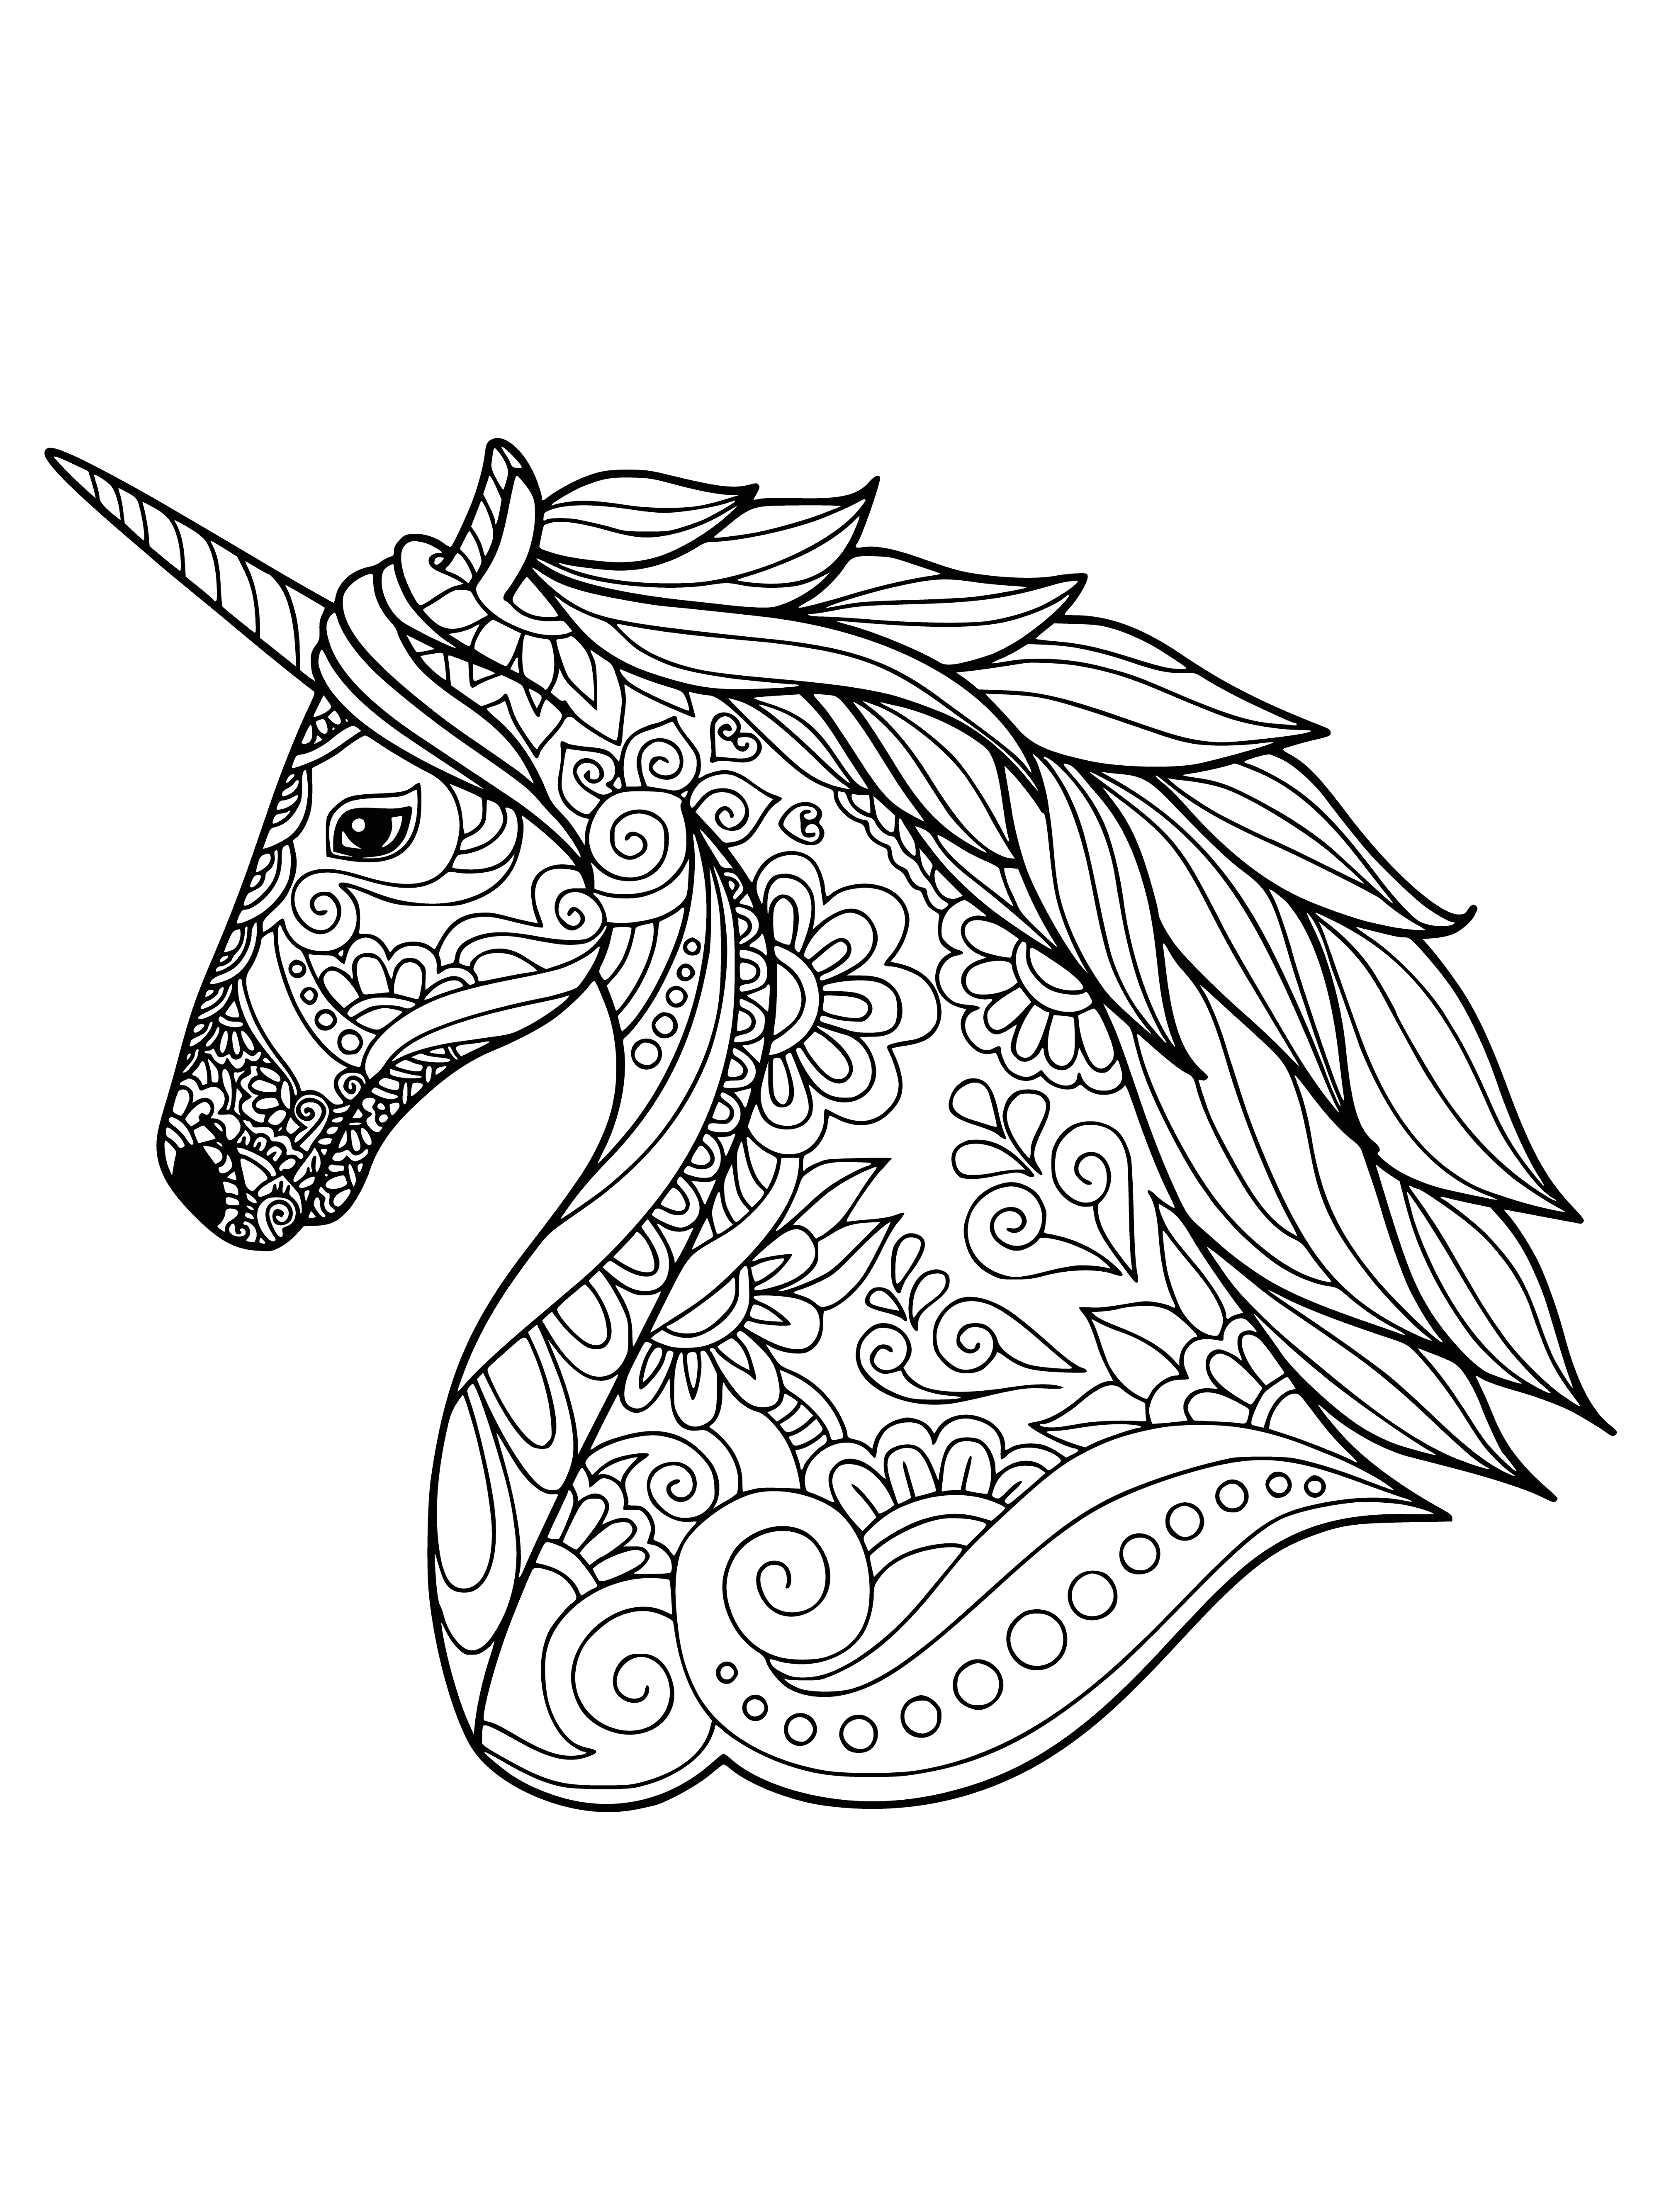 coloring page: Relaxing coloring page of a unicorn surrounded by butterflies, bees & flowers in a field. #coloringpages #unicorn #anti-stress